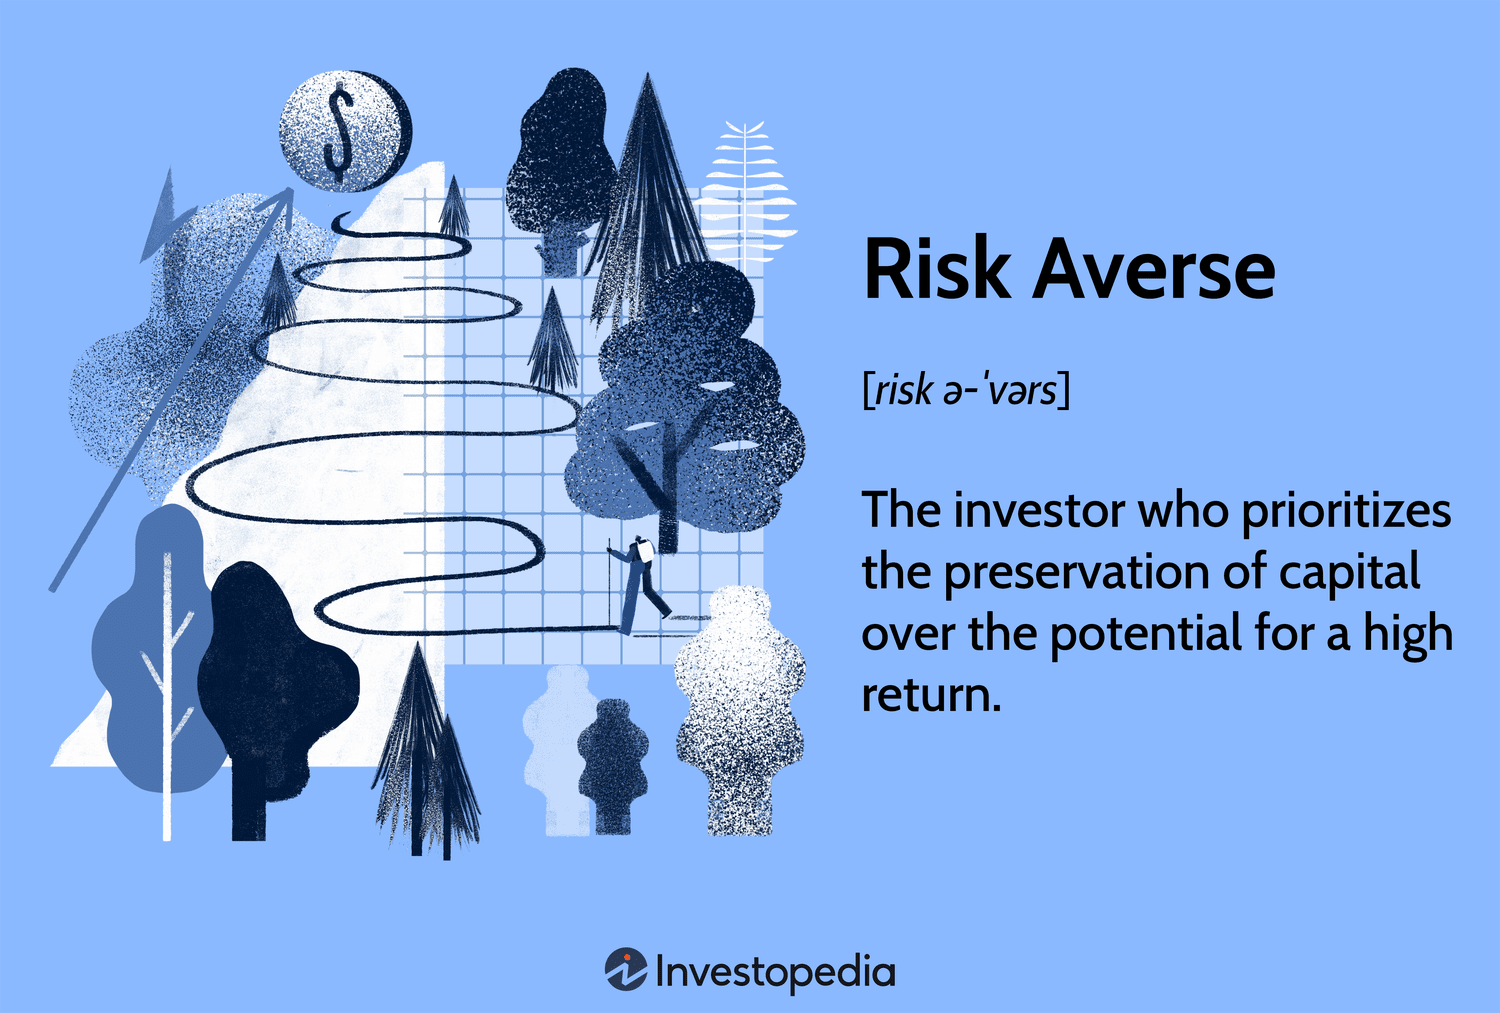 Risk Averse: The investor who prioritizes the preservation of capital over the potential for a high return.